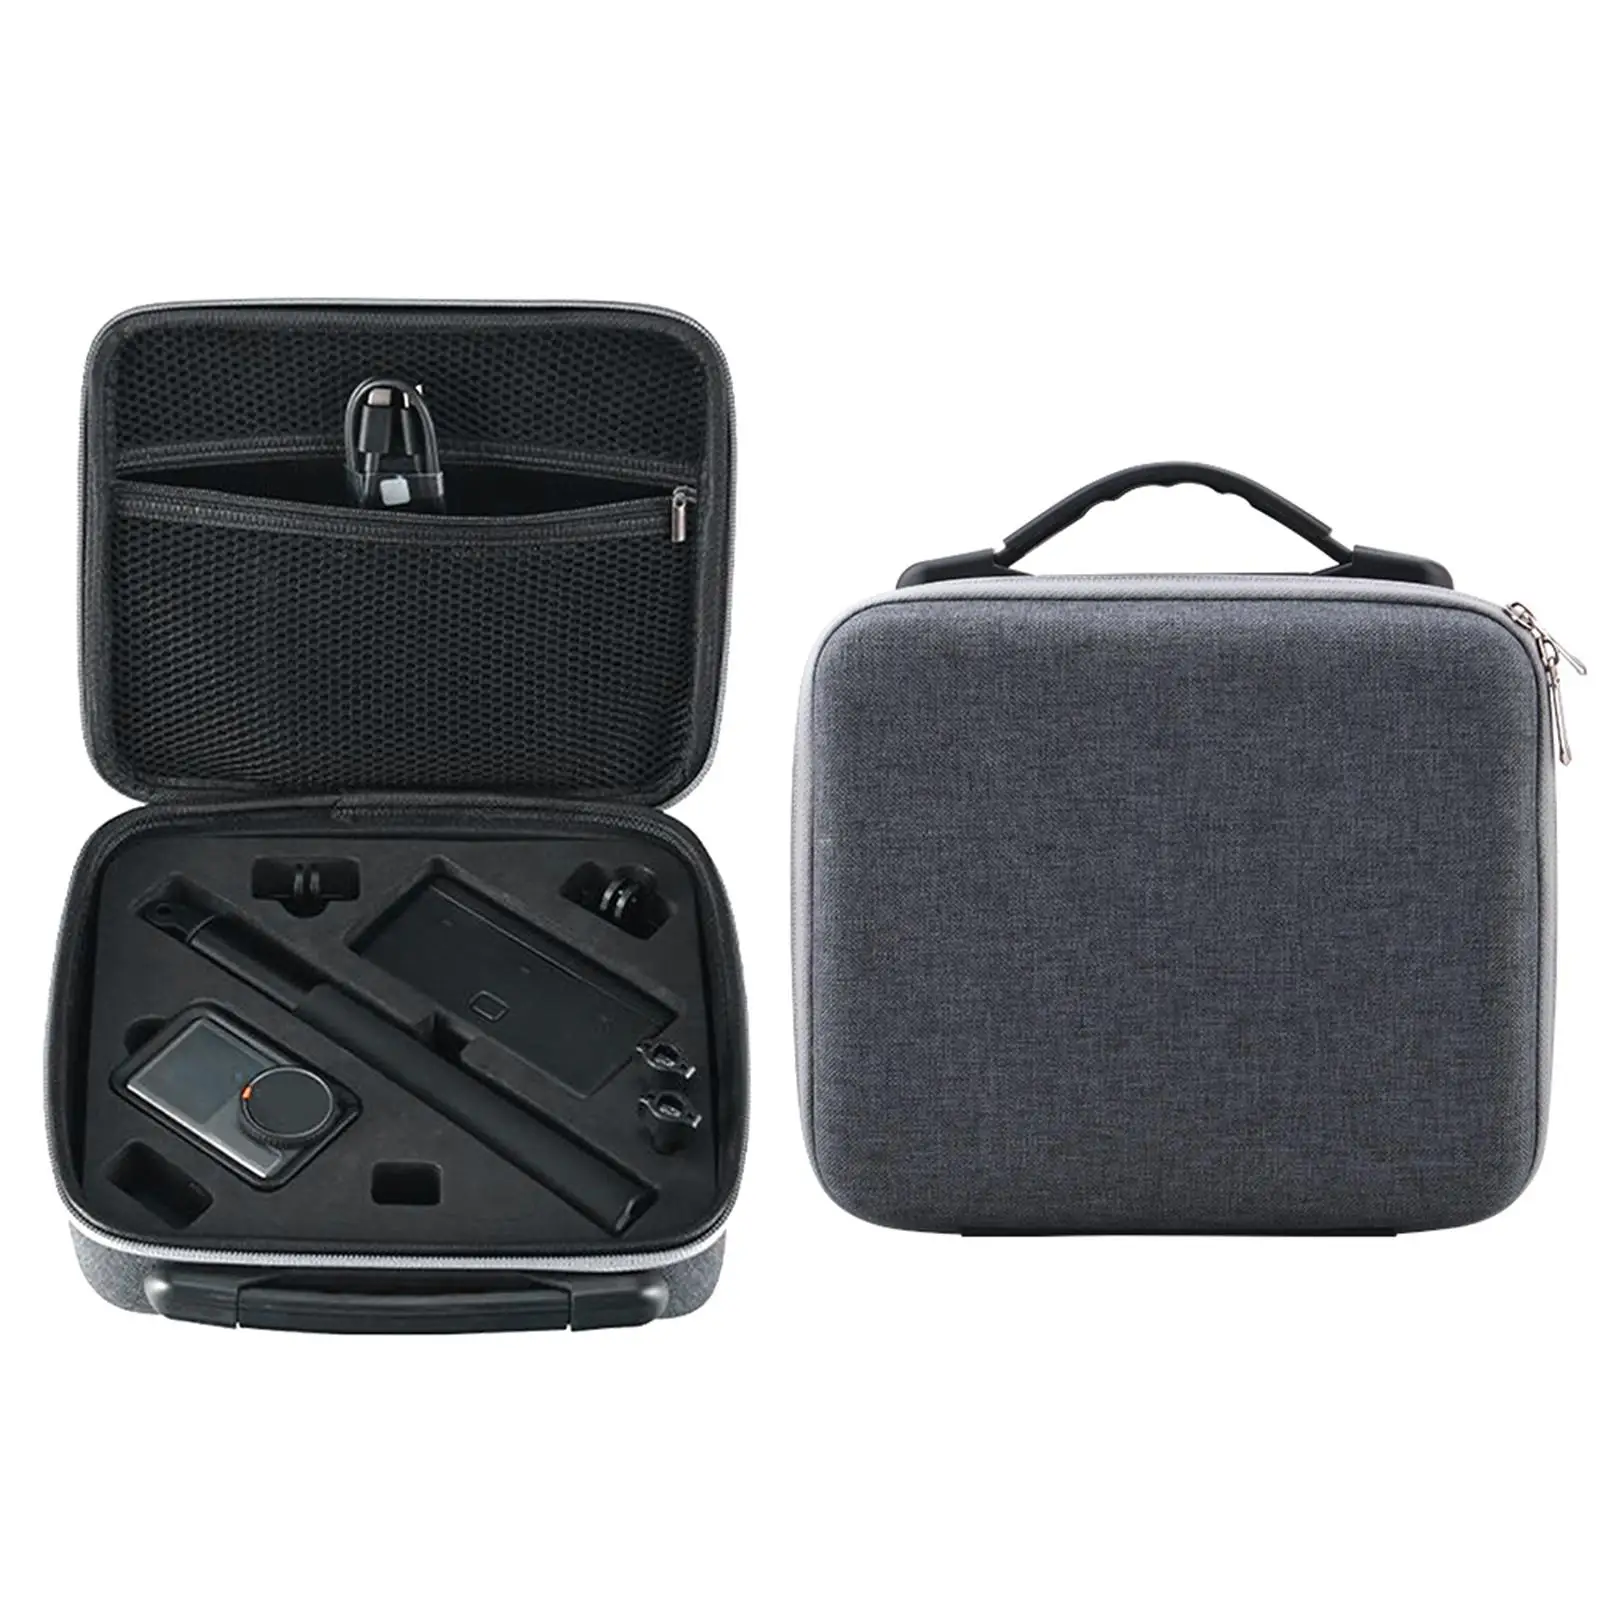 Camera Carrying Case Scratch Resistant Durable Professional Shockproof Storage Bag